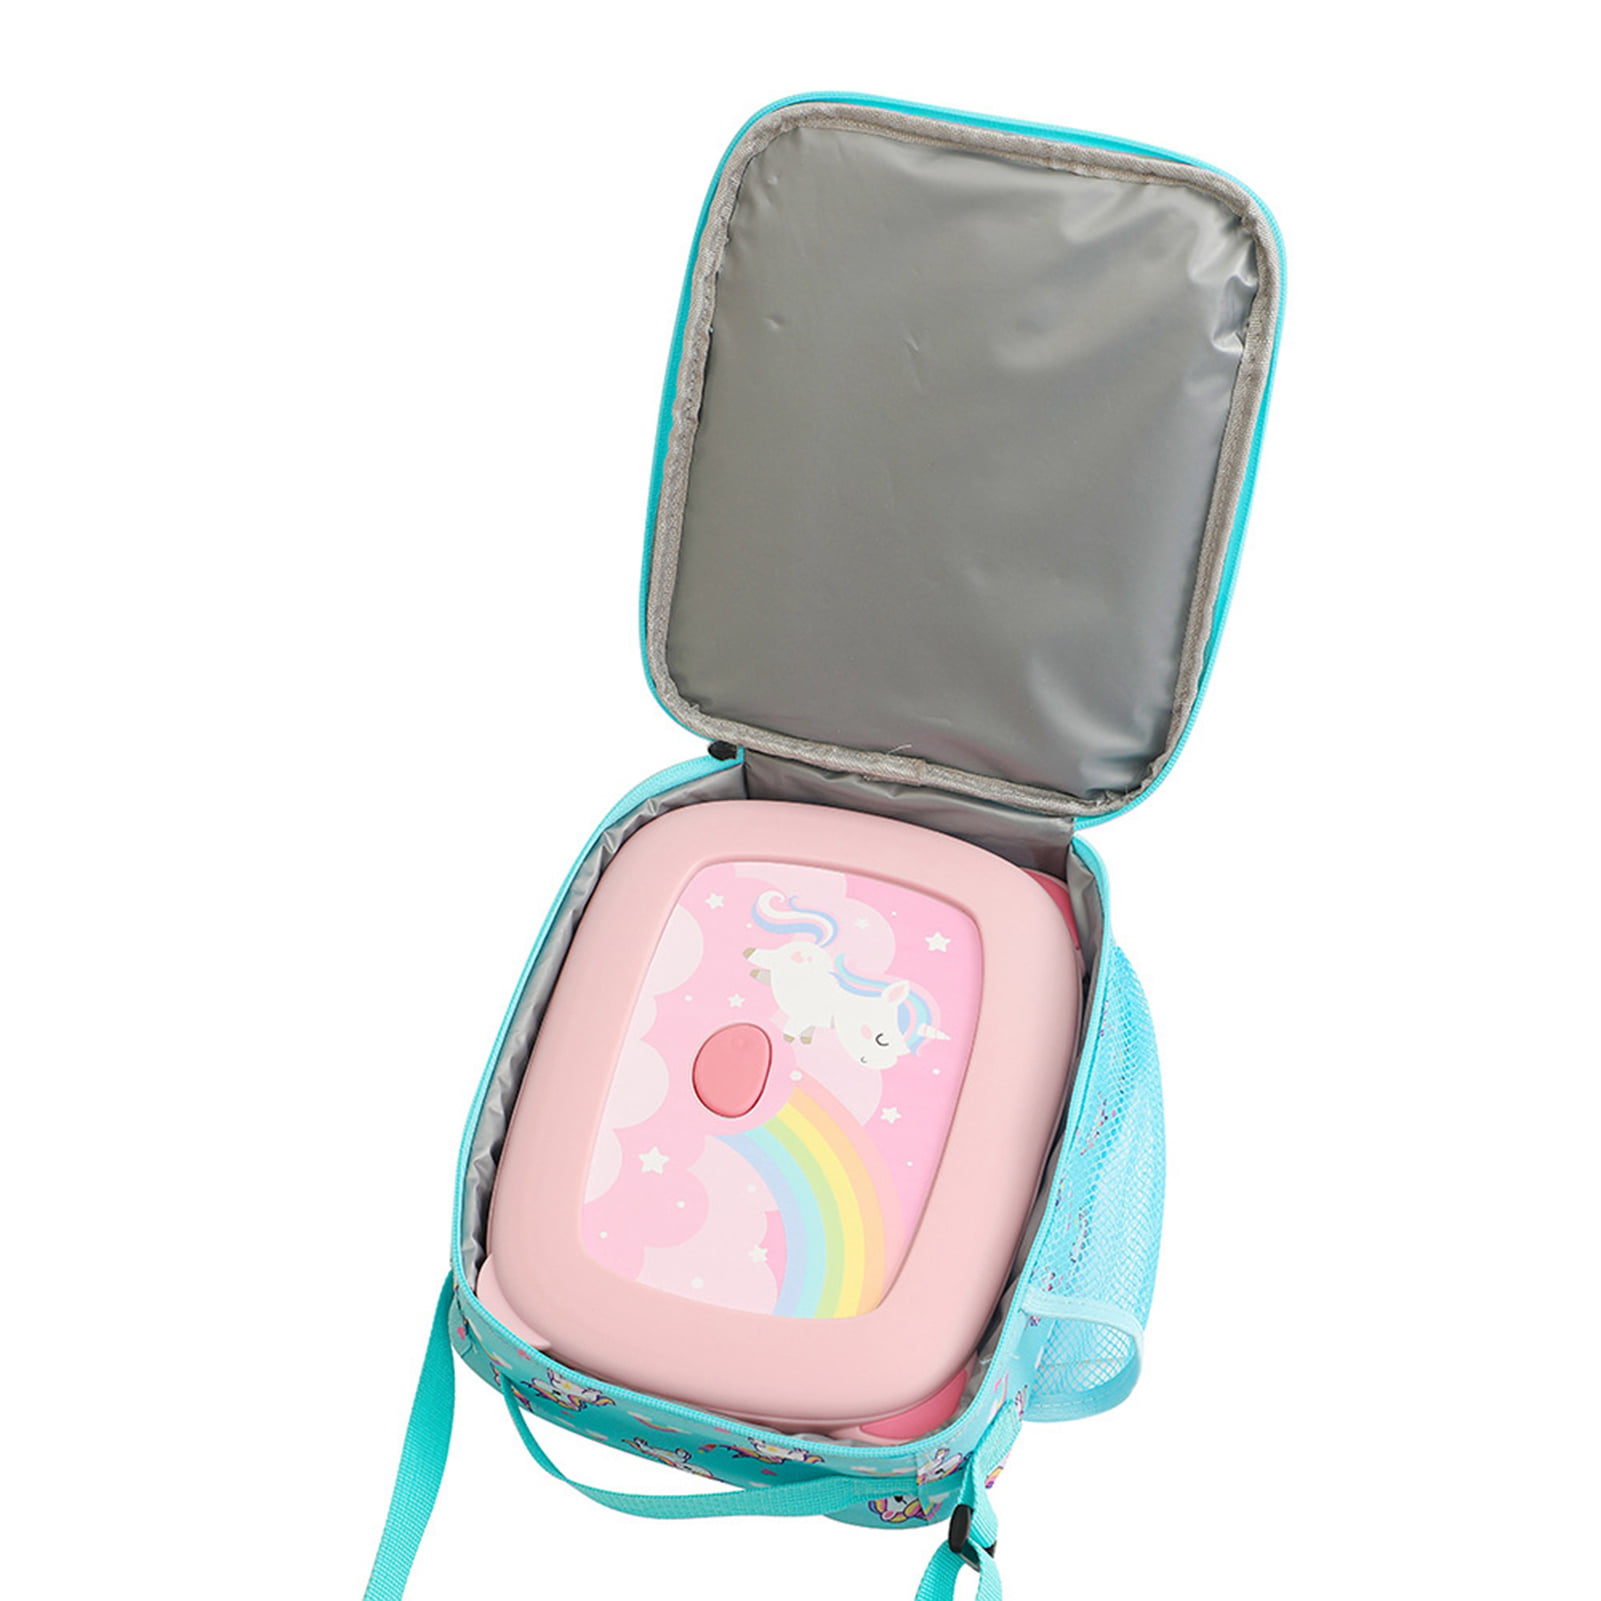 PWFE Cute Unicorn Lunch Boxes Bag for Girls,Reusable Lunch Box Containers  for Boys and Girls with Detachable Shoulder Strap(Blue) 